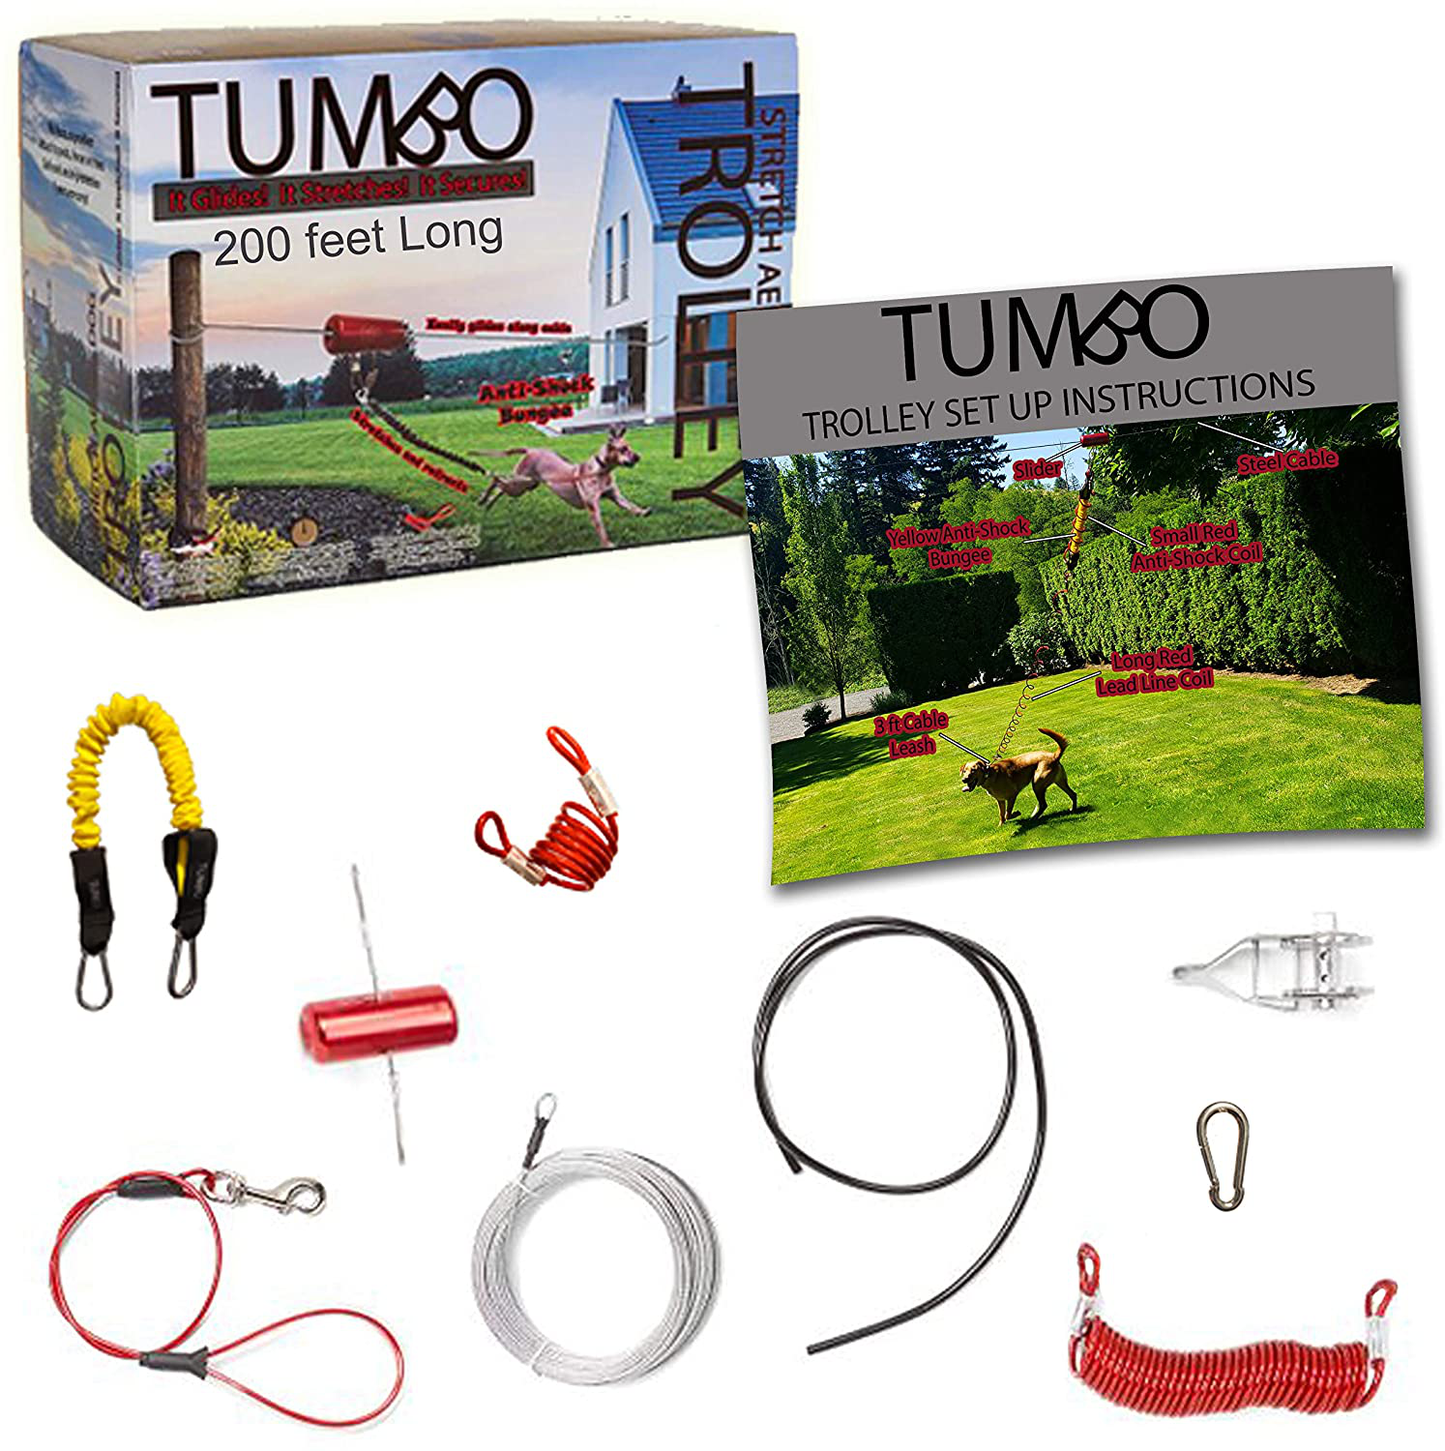 Tumbo Trolley Dog Containment System - Stretching Coil Cable with Anti-Shock Bungee (Safer and Less Tangles) Aerial Dog Tie Out Animals & Pet Supplies > Pet Supplies > Dog Supplies > Dog Kennels & Runs Tumbo 200 ft Regular Trolley  